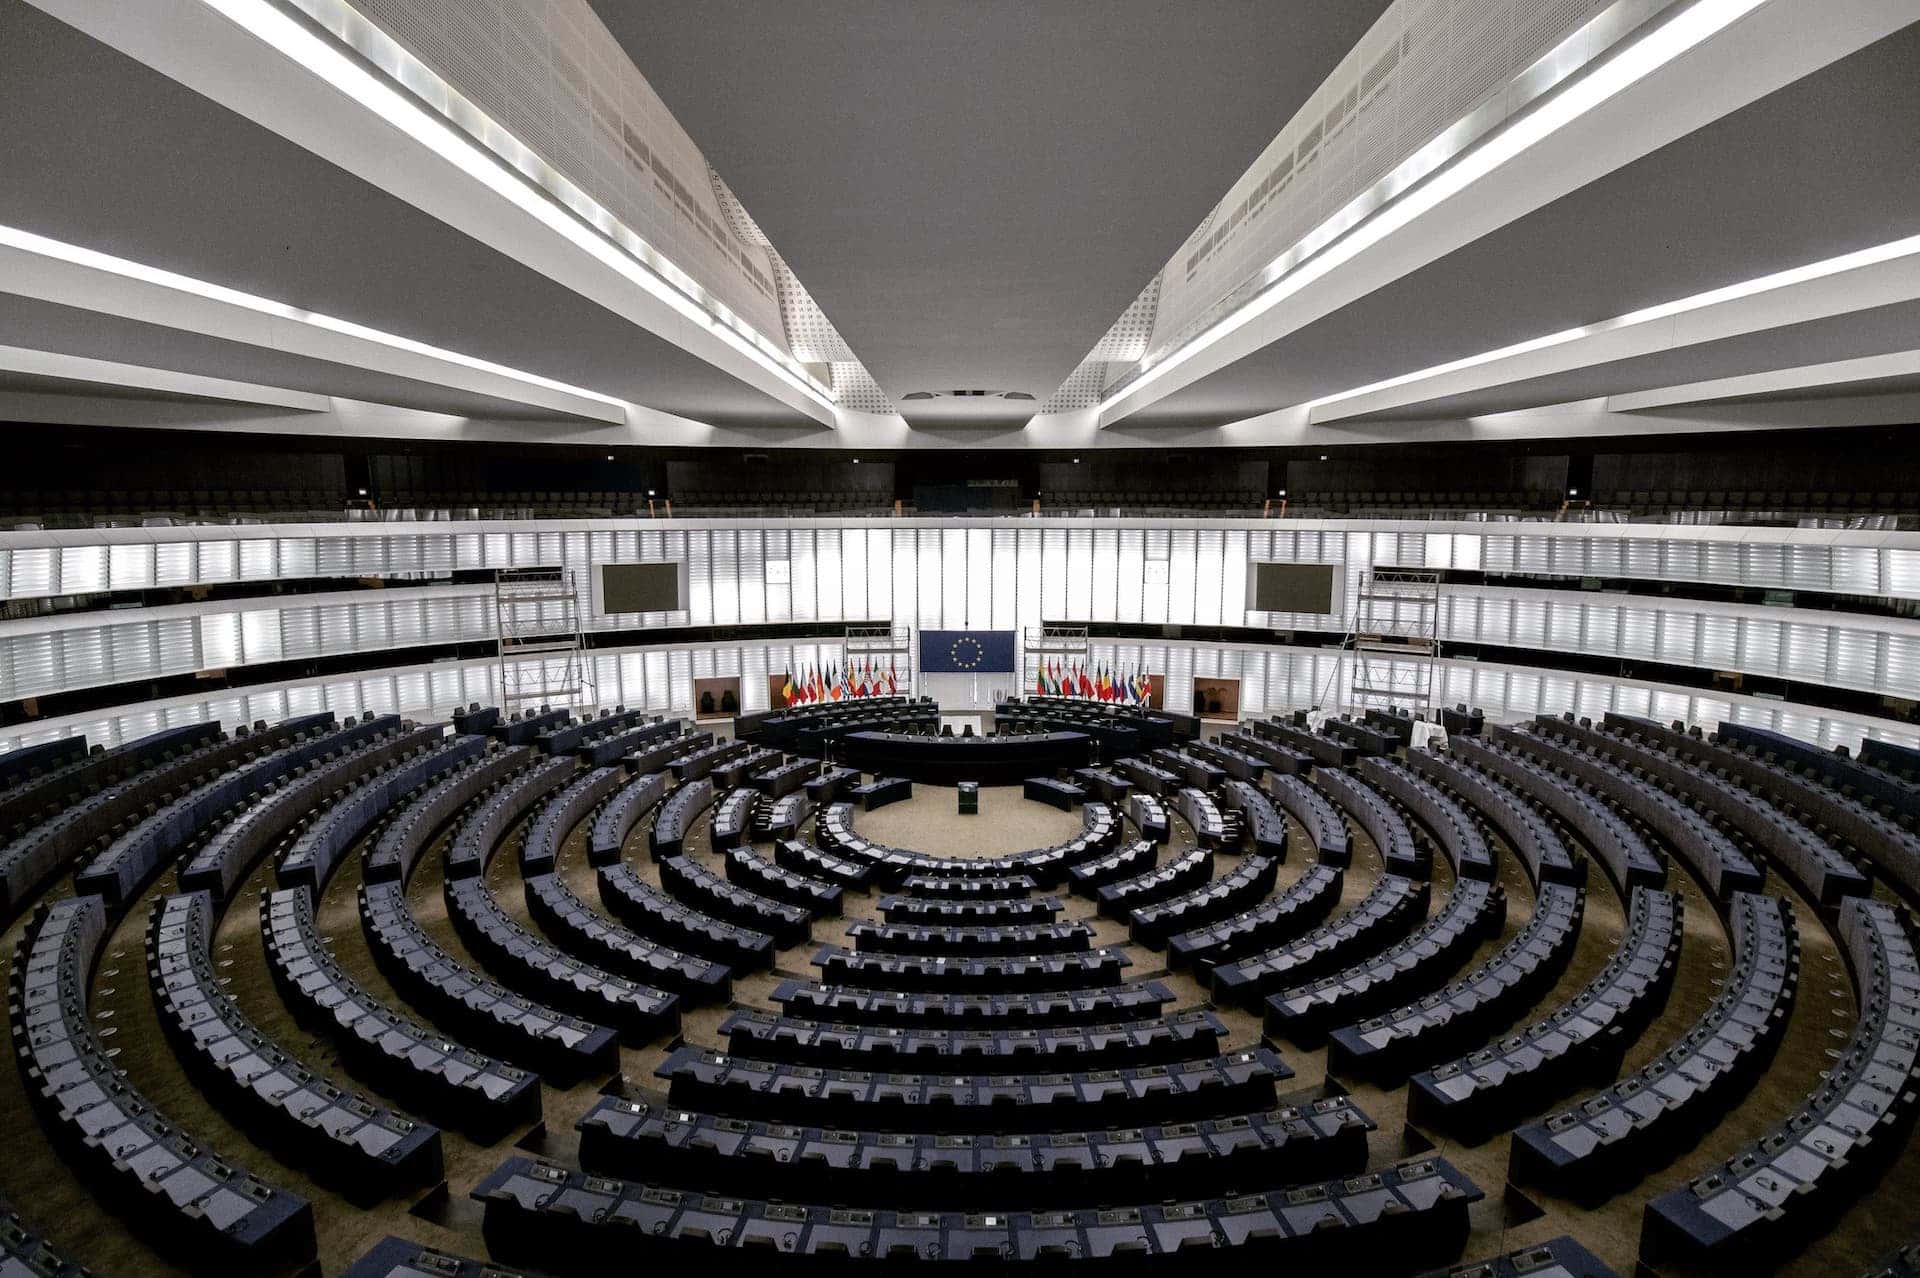 An inside view of the EU parliament - Photo by Frederic Köberl on Unsplash"